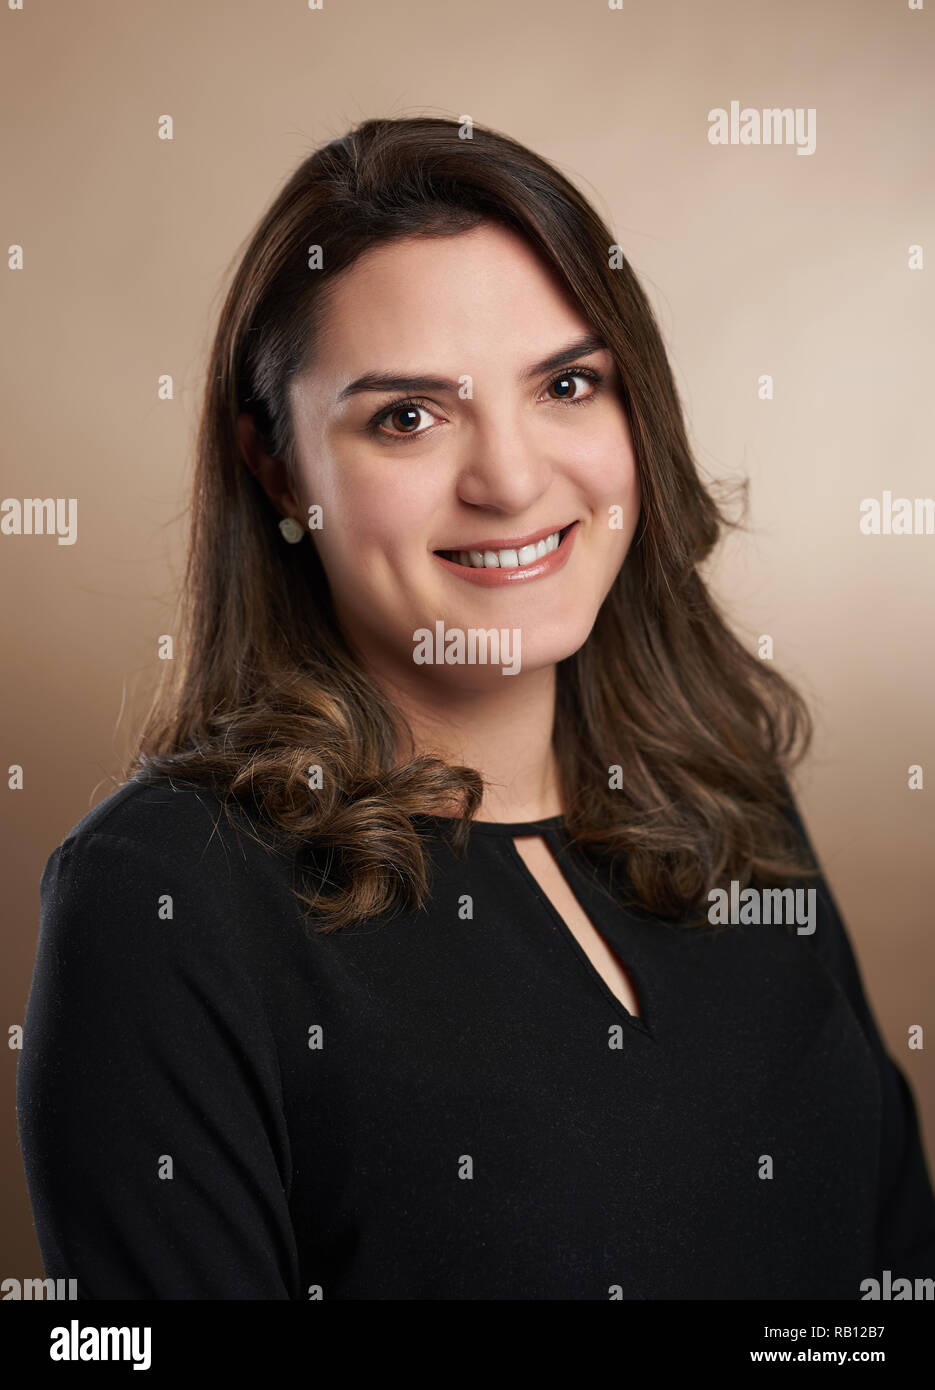 Portrait of young smiling woman on brown studio background Stock Photo